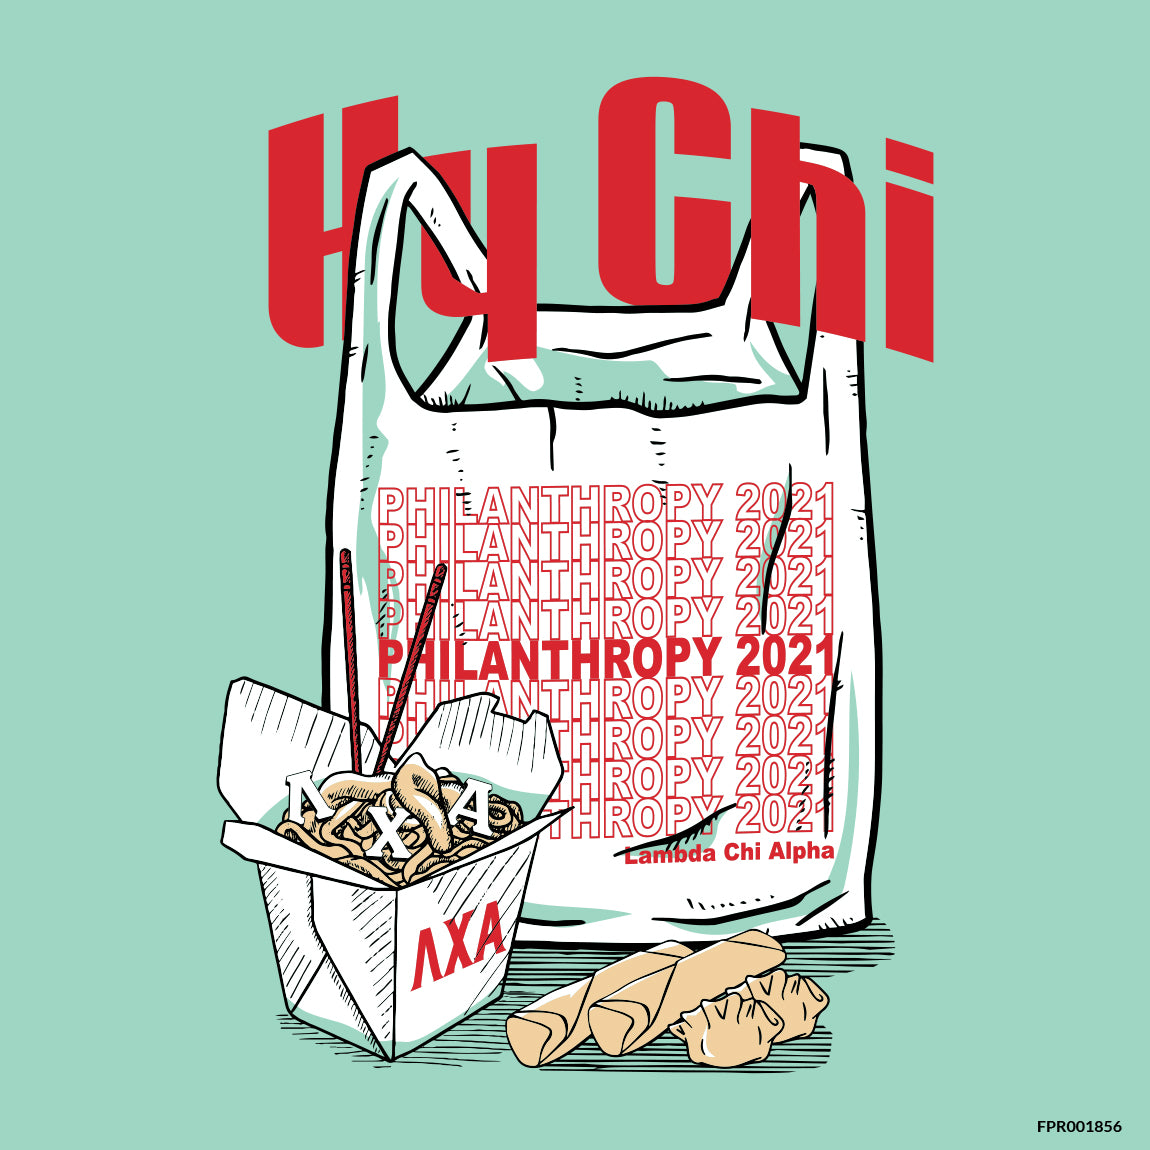 Chinese Takeout